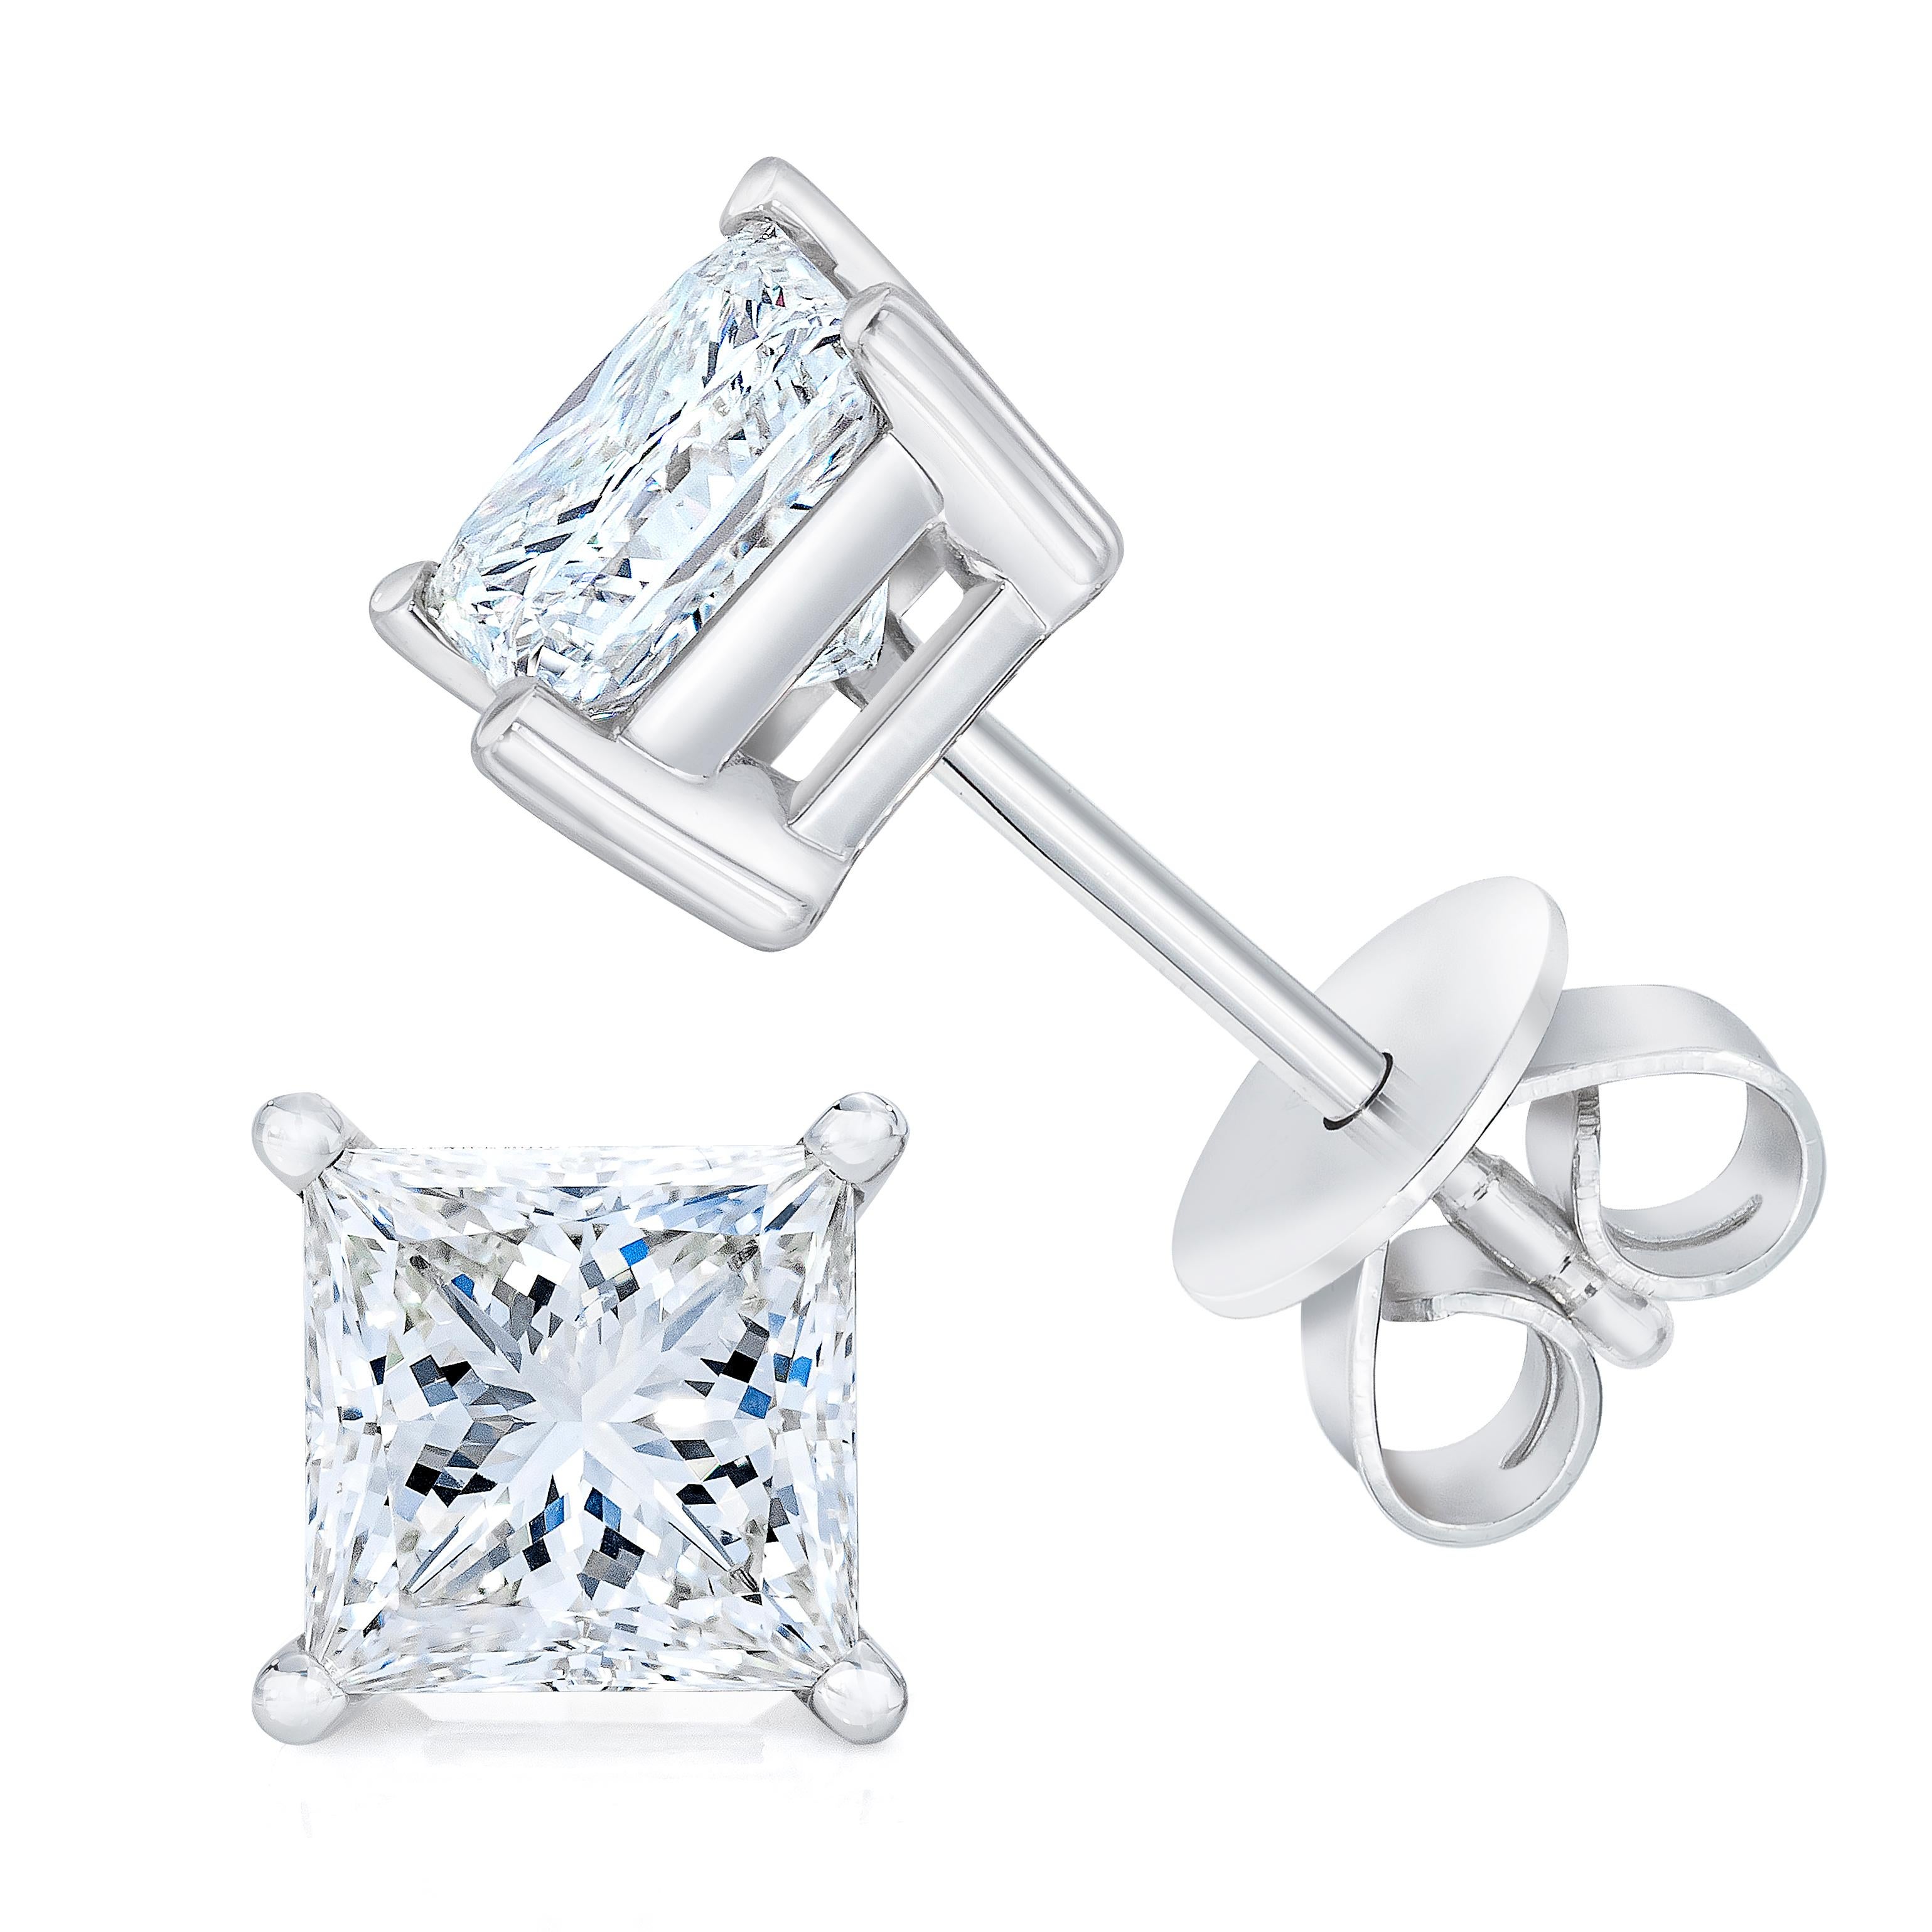 Frame her face with the bold and impressive look of these fabulous princess cut diamond stud earrings. Crafted in 14K white gold, each earring features a mesmerizing 0.5 ct. diamond solitaire in a four-prong setting. Captivating with 1.0 ct tdw of